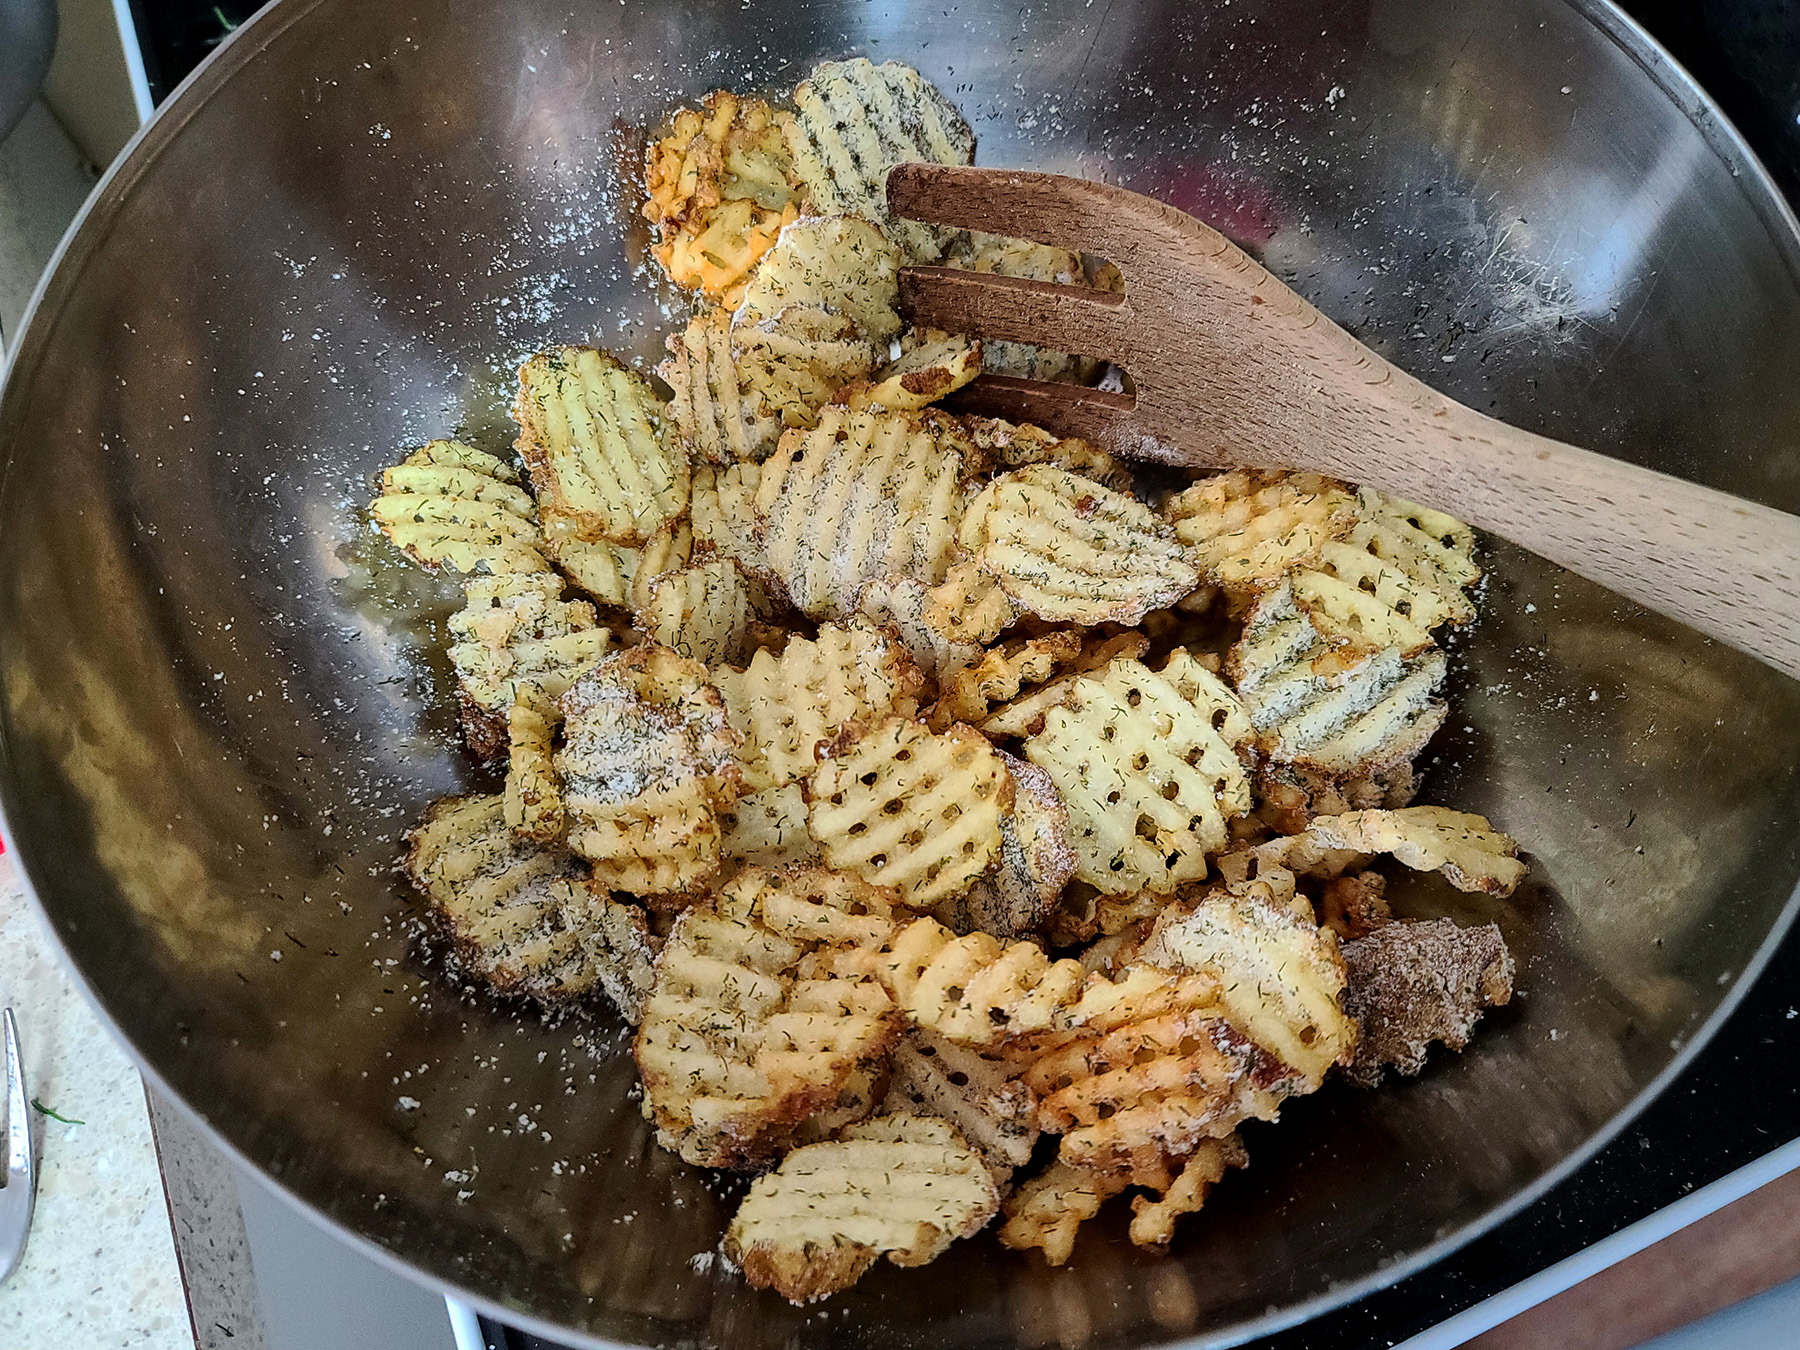 Waffle cut fries in a metal bowl, being tossed with dill pickle seasoning.